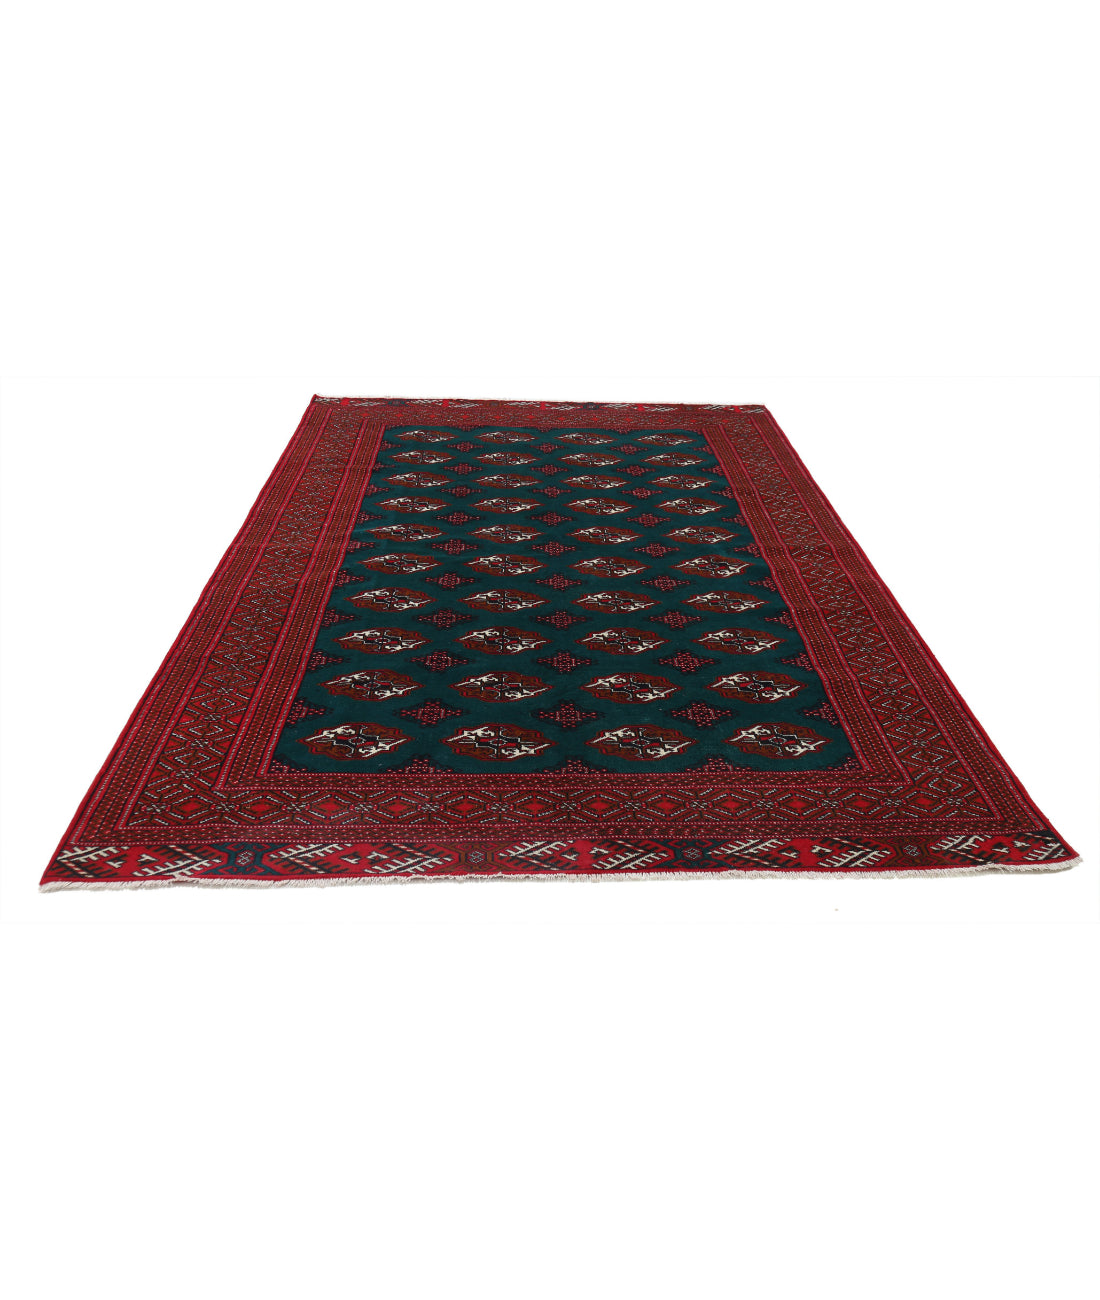 Hand Knotted Tribal Bokhara Wool Rug - 6'2'' x 9'7'' 6'2'' x 9'7'' (185 X 288) / Green / Red